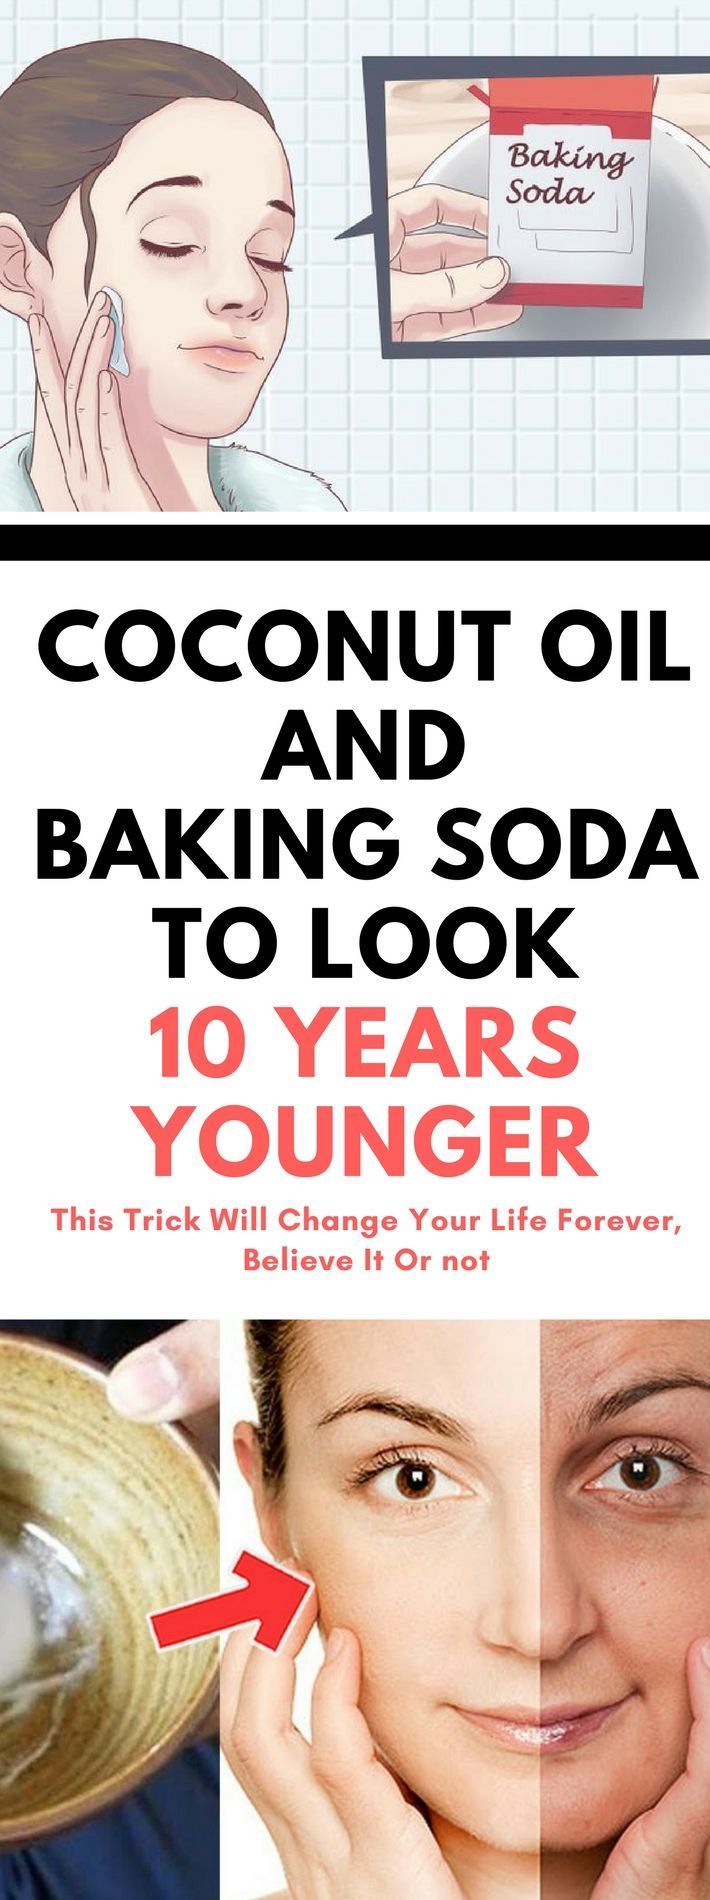 This Is How To Use Coconut Oil And Baking Soda To Look 10 Years Younger -   24 fitness coconut oil
 ideas